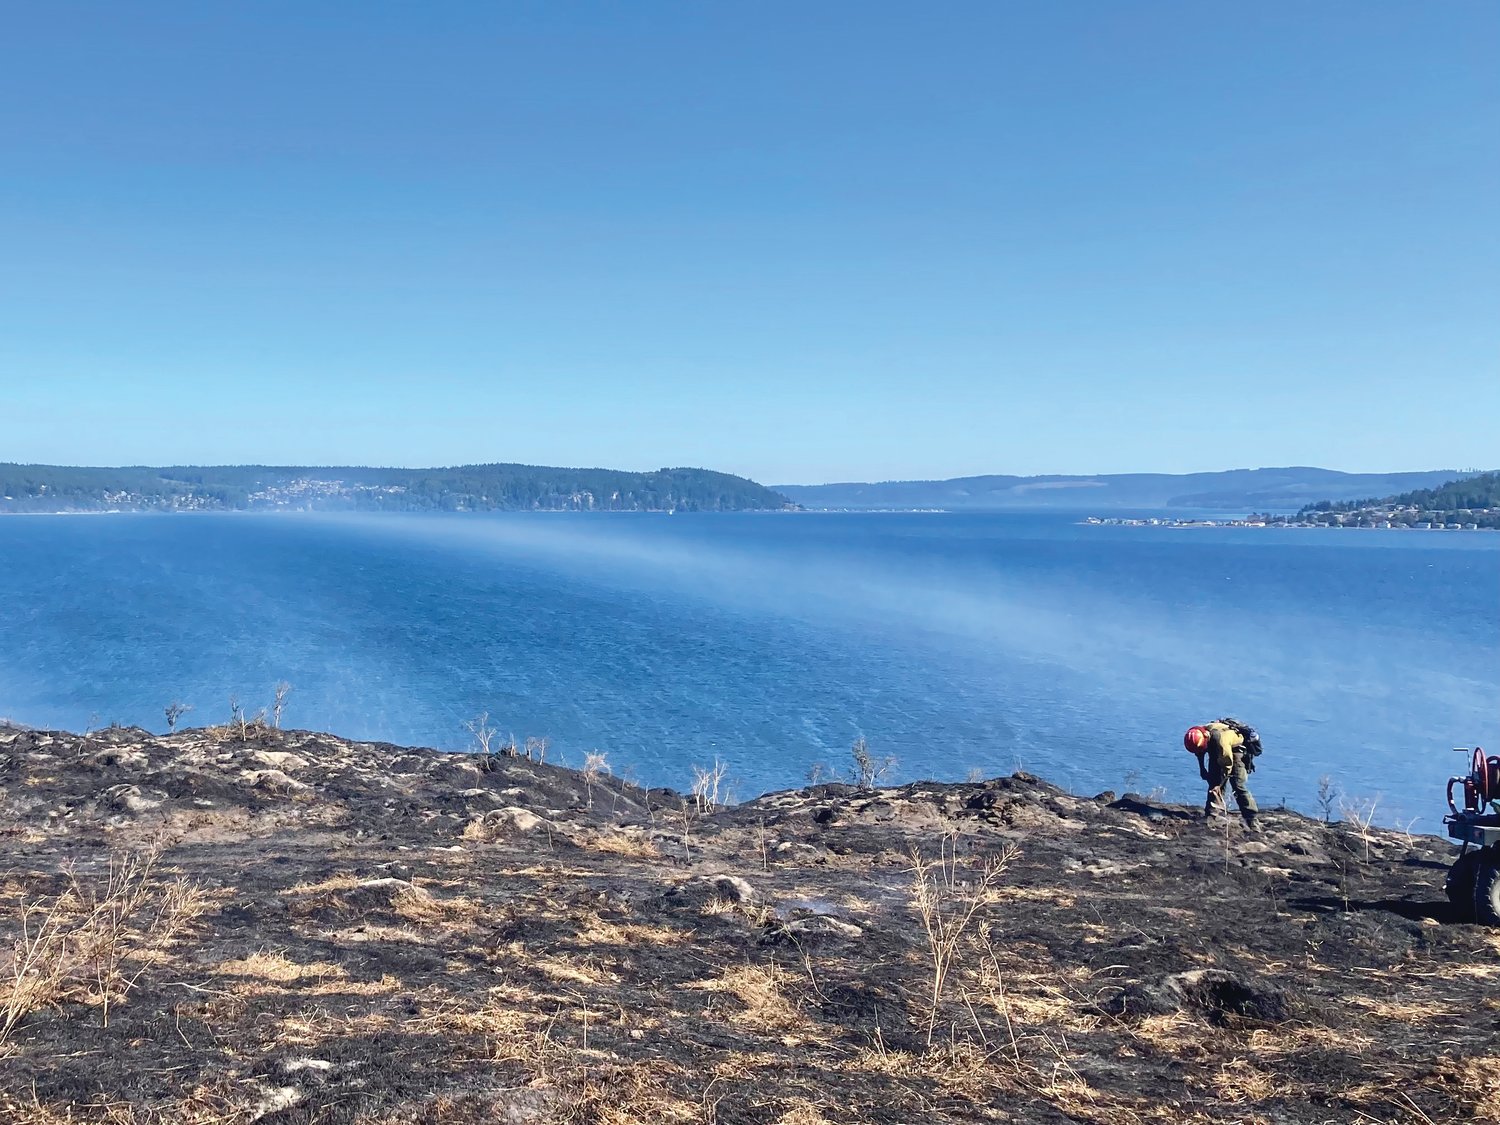 Firefighters work on extinguishing smoldering areas on Protection Island following the initial blaze.